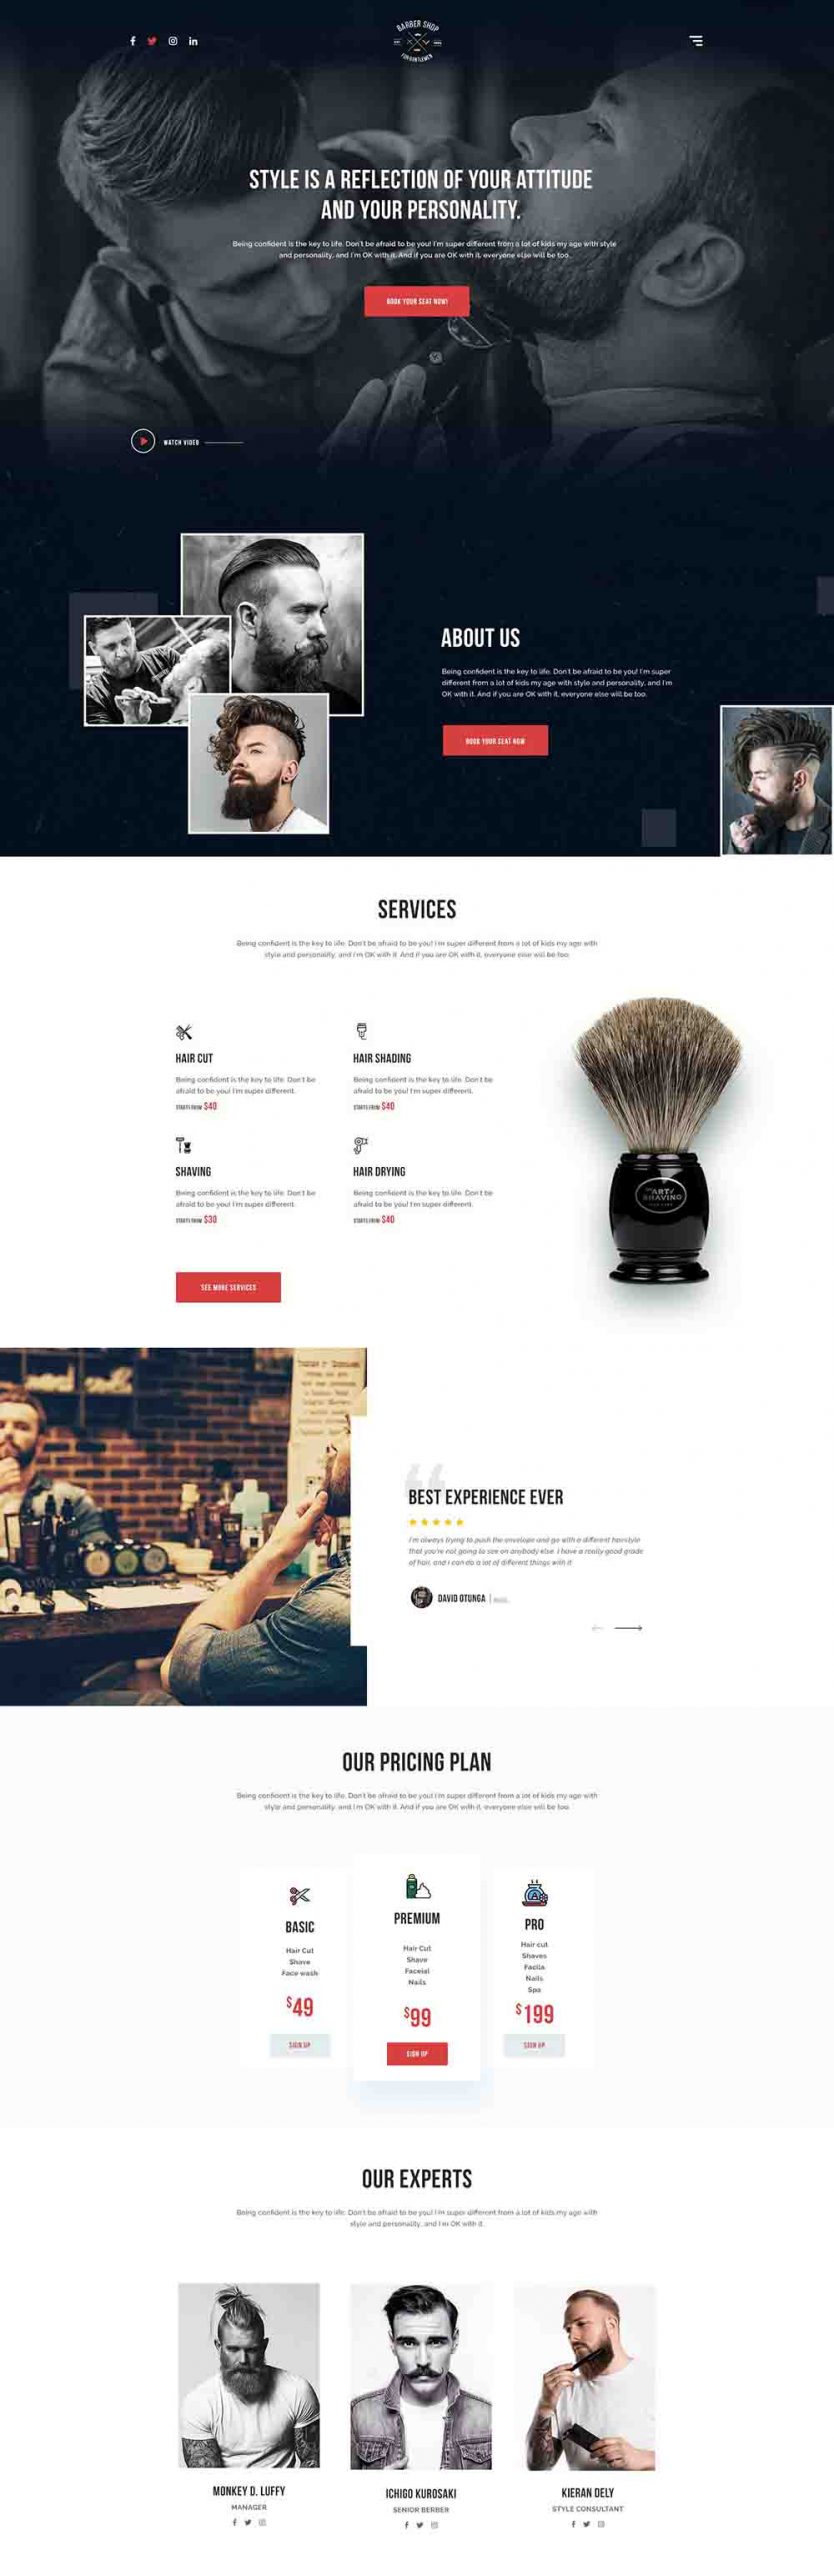 Download Barber Shop Landing Page Free Adobe Xd Template - Indiater